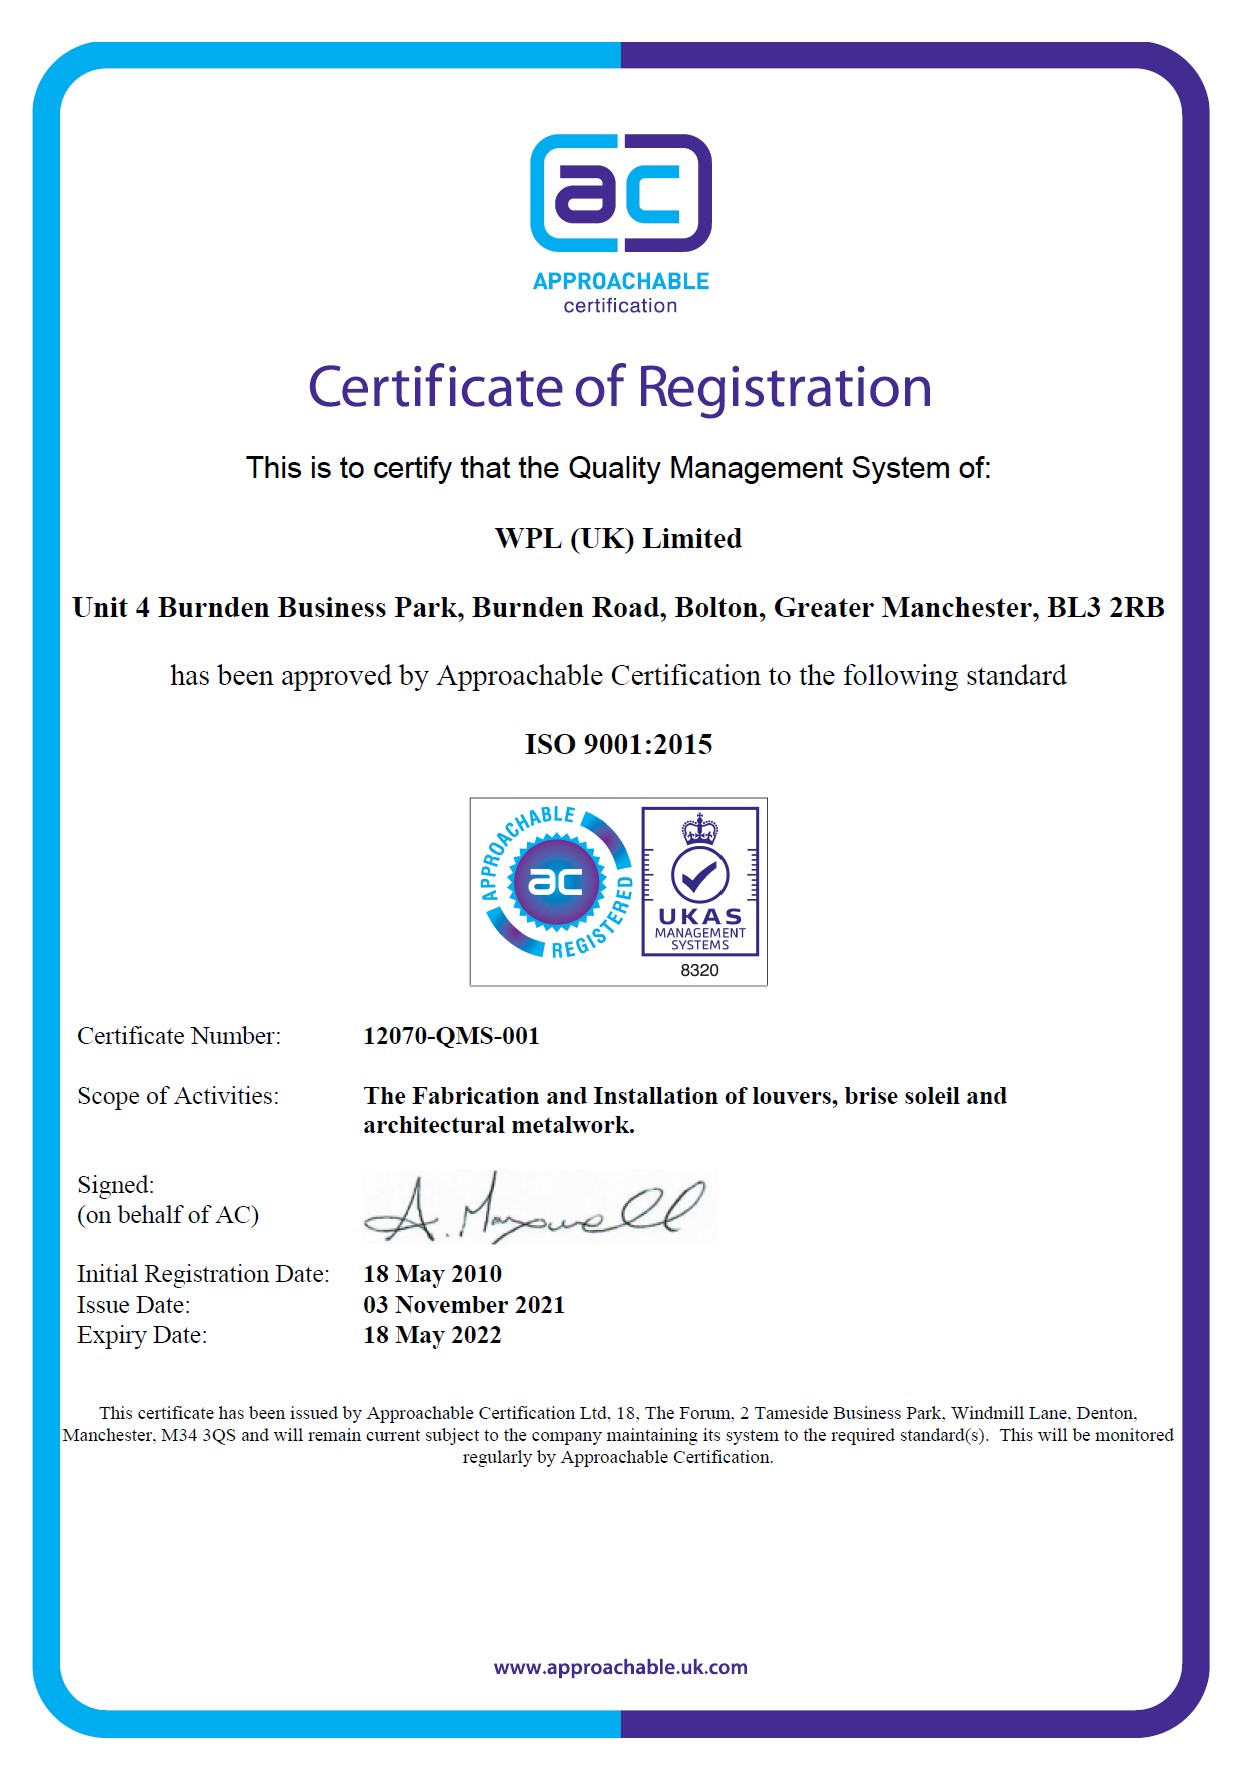 WPLUK ISO9001 2015 Certification to 18th May 2022